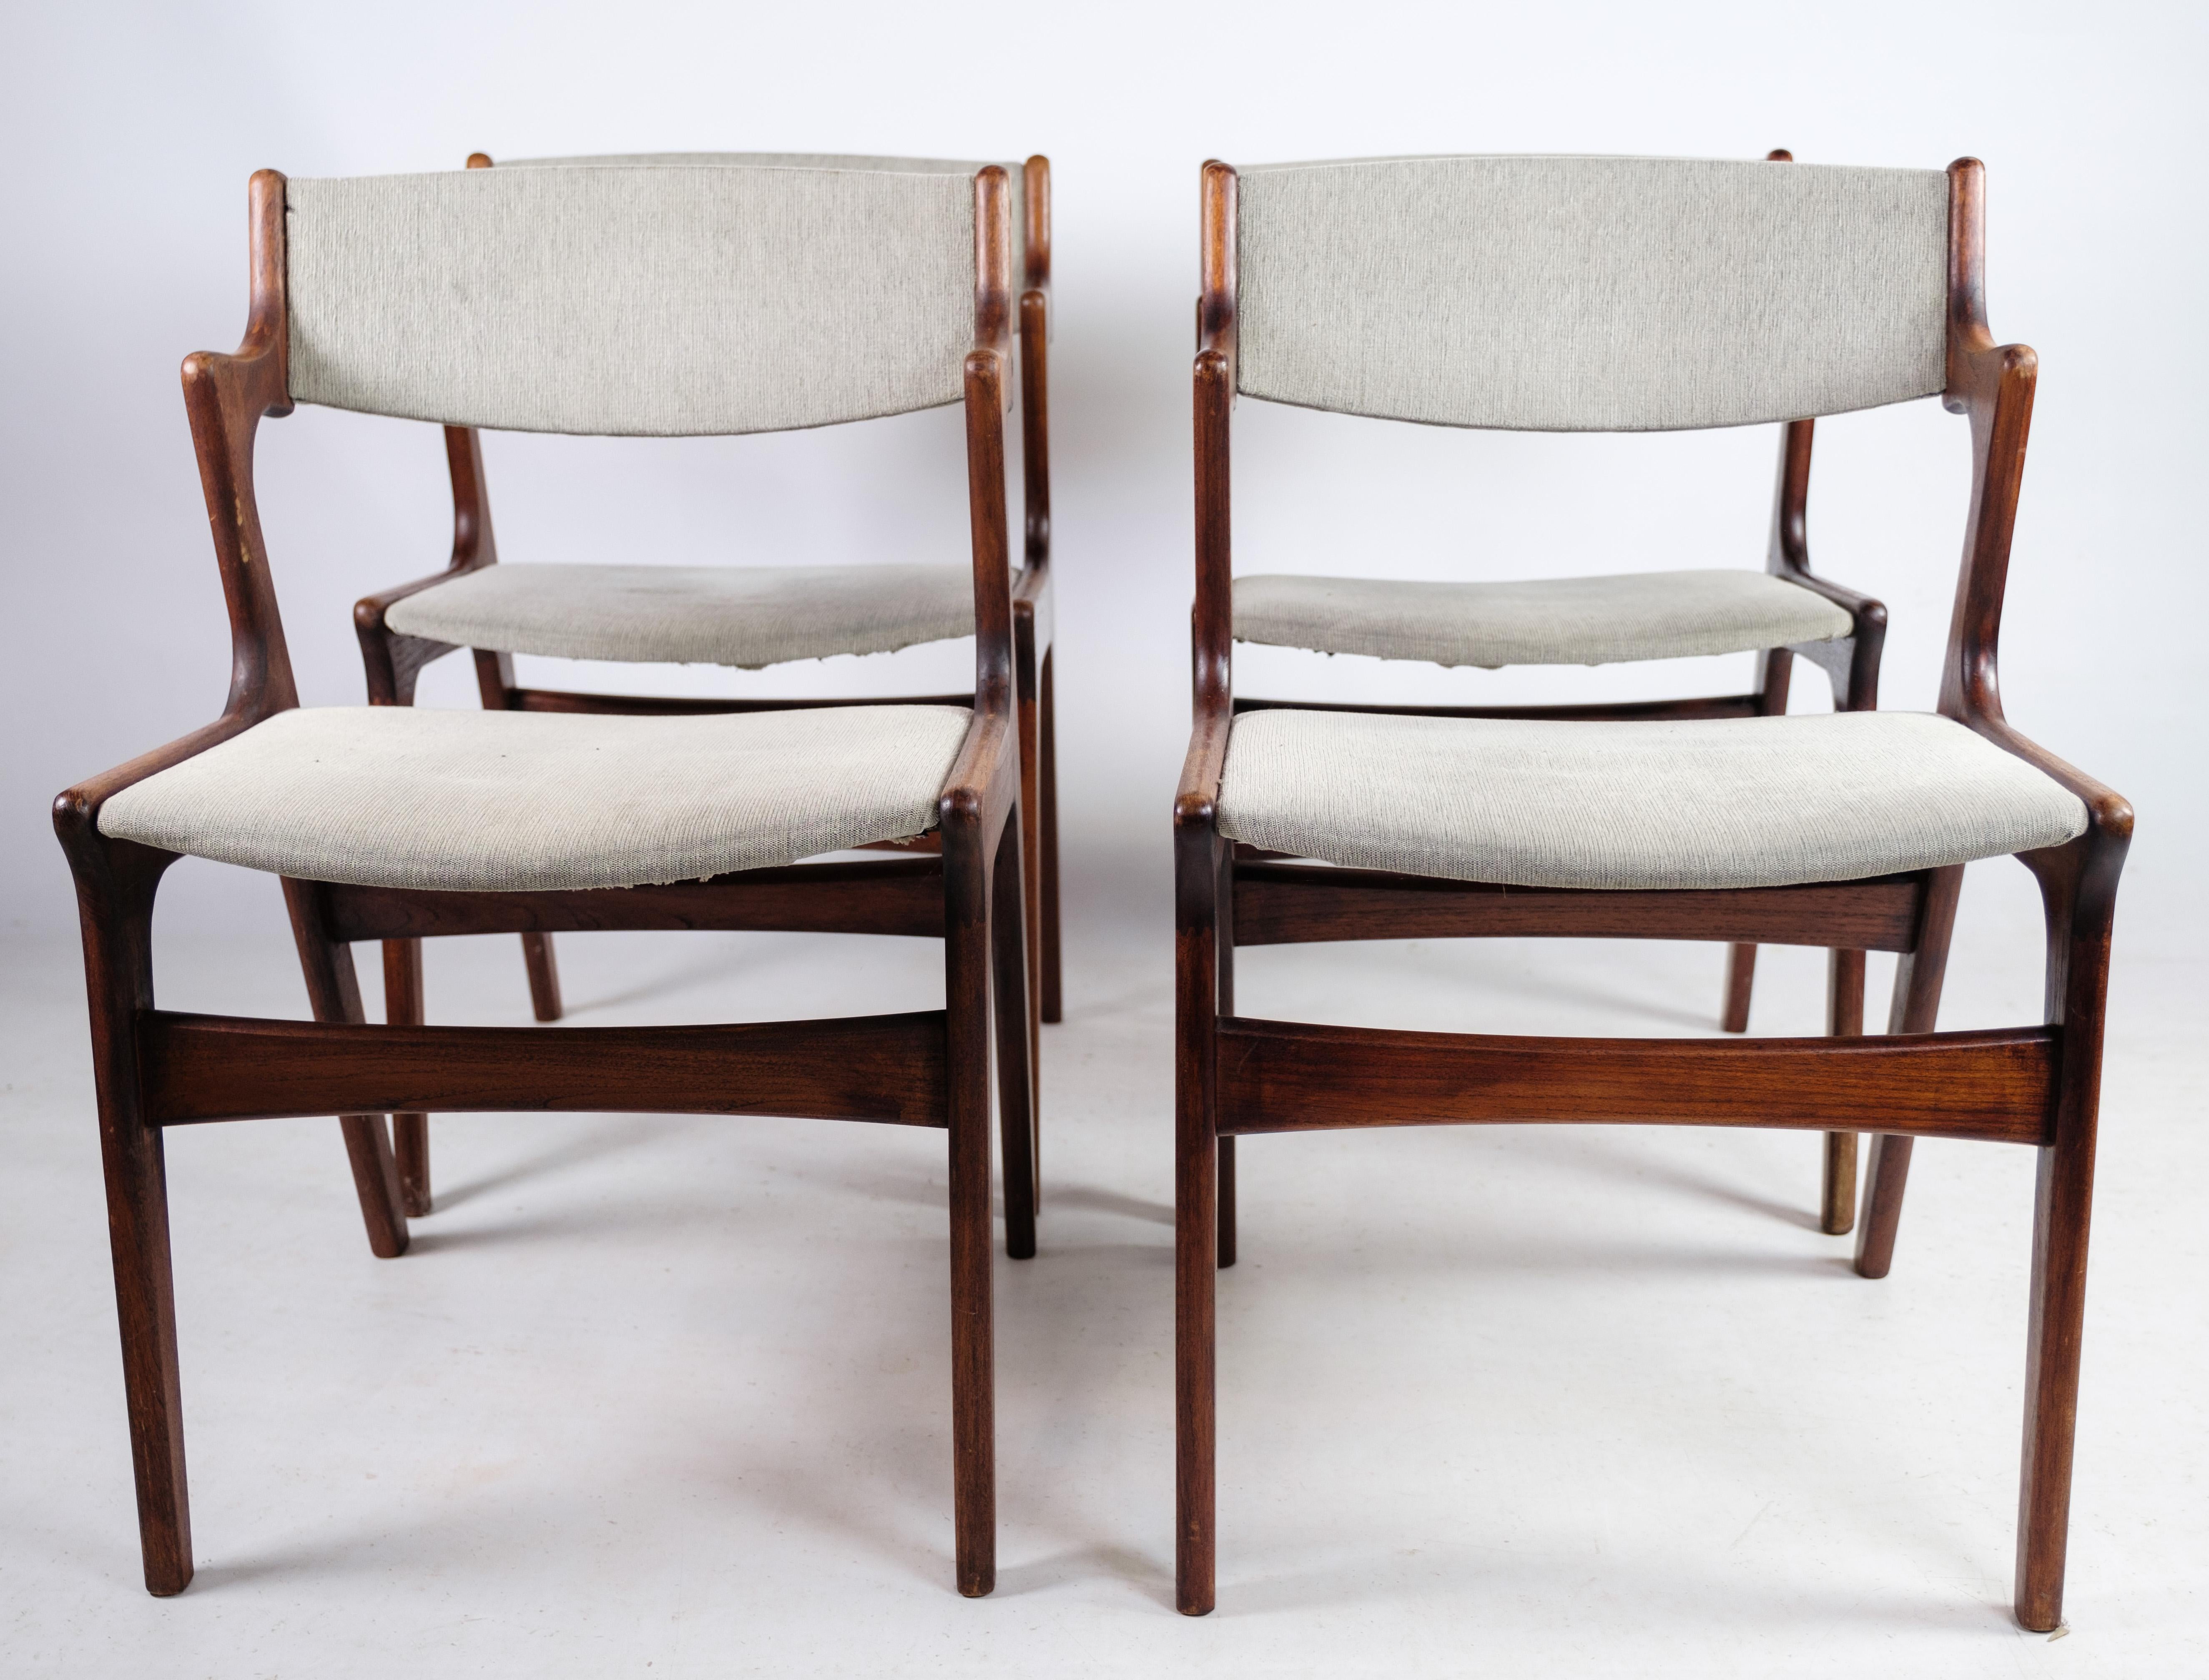 This set of four armchairs, crafted from teak wood and designed by Nova Furniture around the 1960s, represents a timeless expression of mid-century Danish design. With their sleek lines, rich teak finish, and comfortable upholstery, these chairs